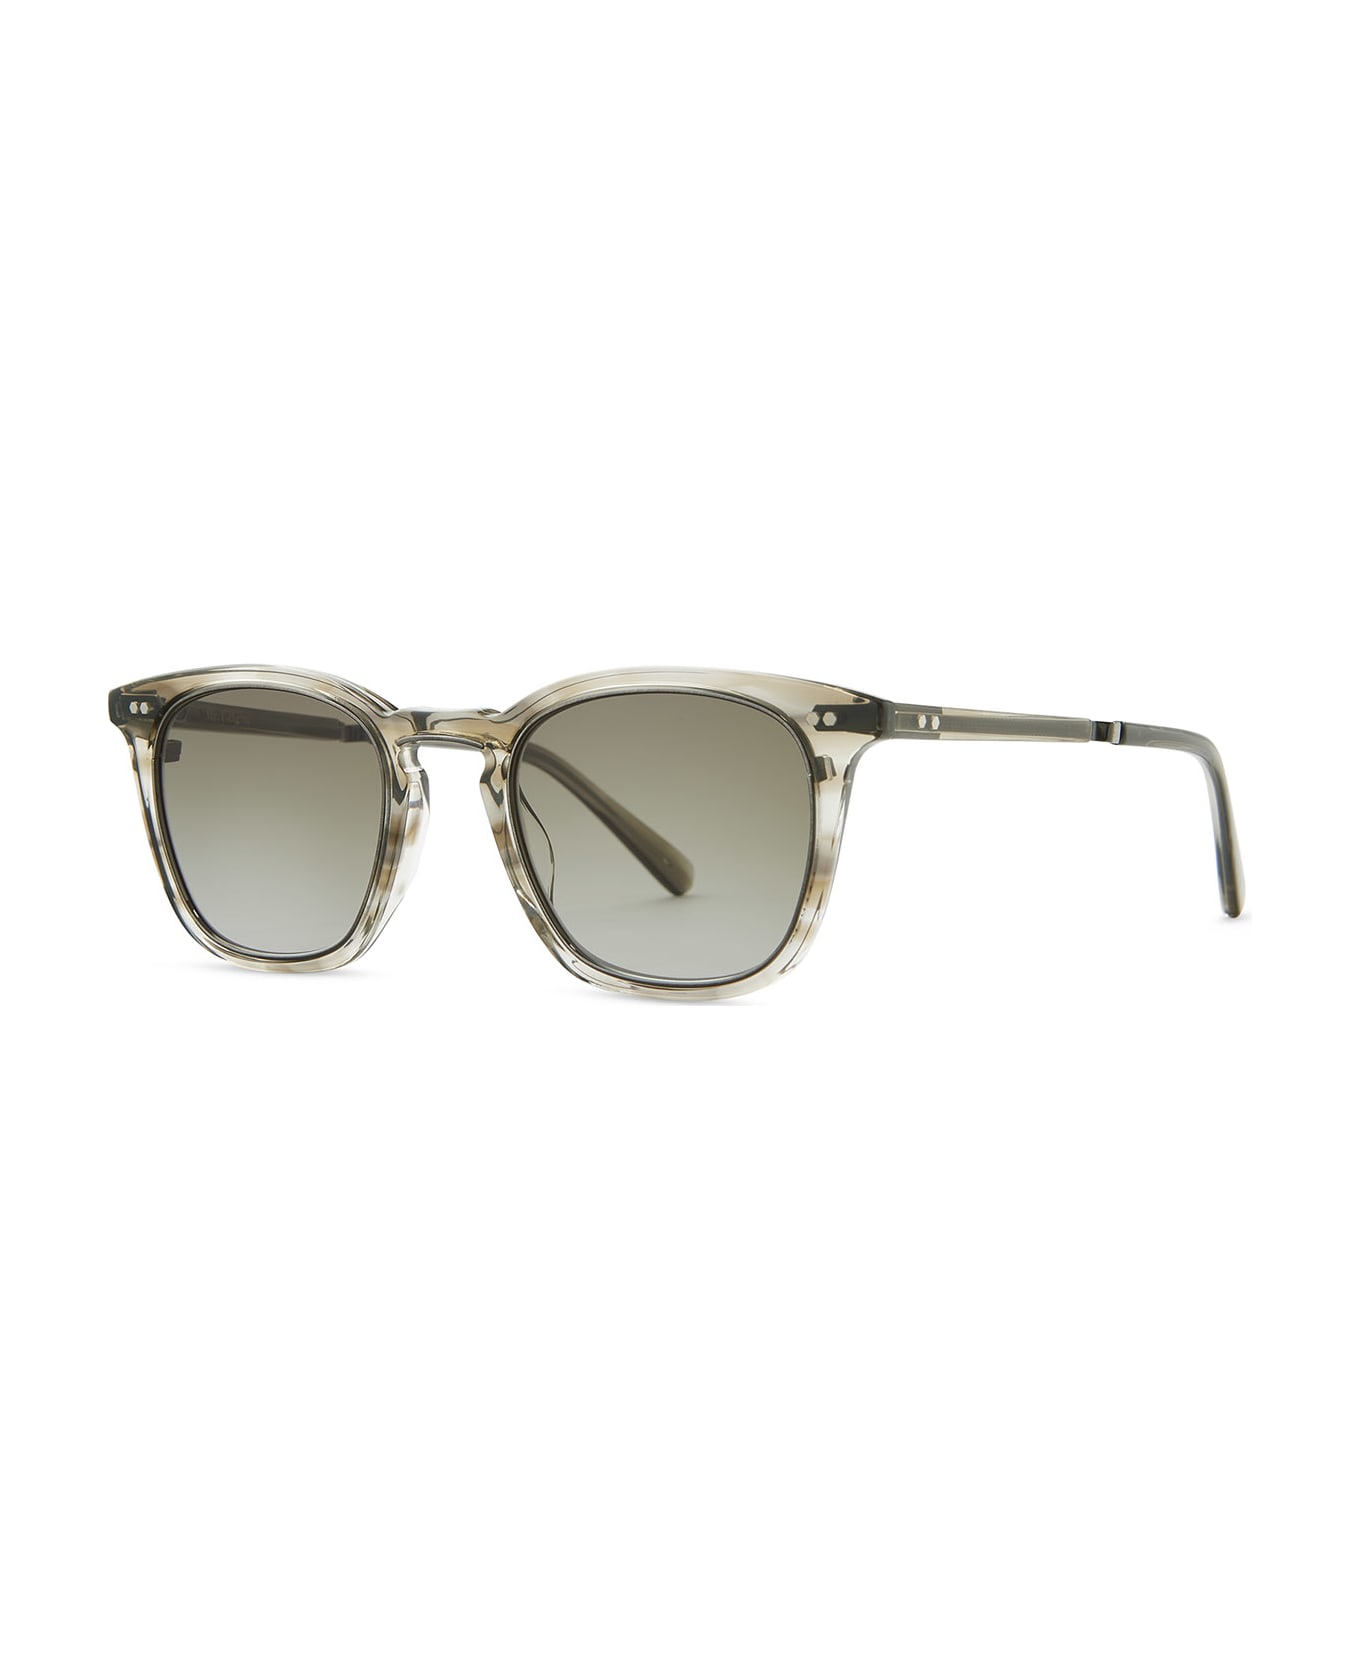 Mr. Leight Getty Ii S Celestial Grey-pewter Sunglasses -  Celestial Grey-Pewter